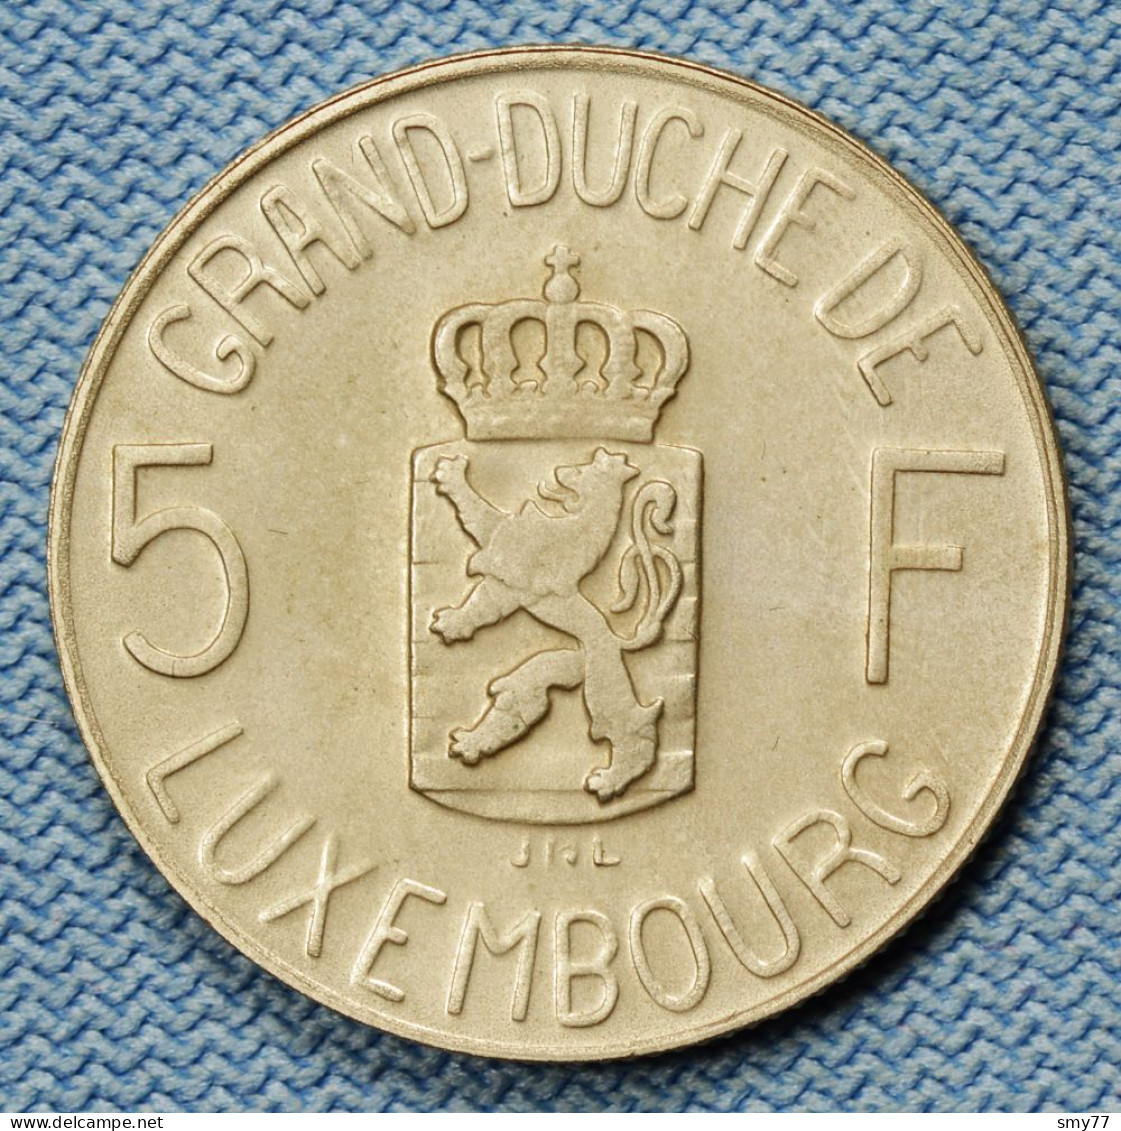 Luxembourg • 5 Francs 1980  Argent / Silver 925‰ (Charlotte) •  QP / Flan Poli  •  3'000 Ex.  • Rare •  [24-462] - Luxemburgo